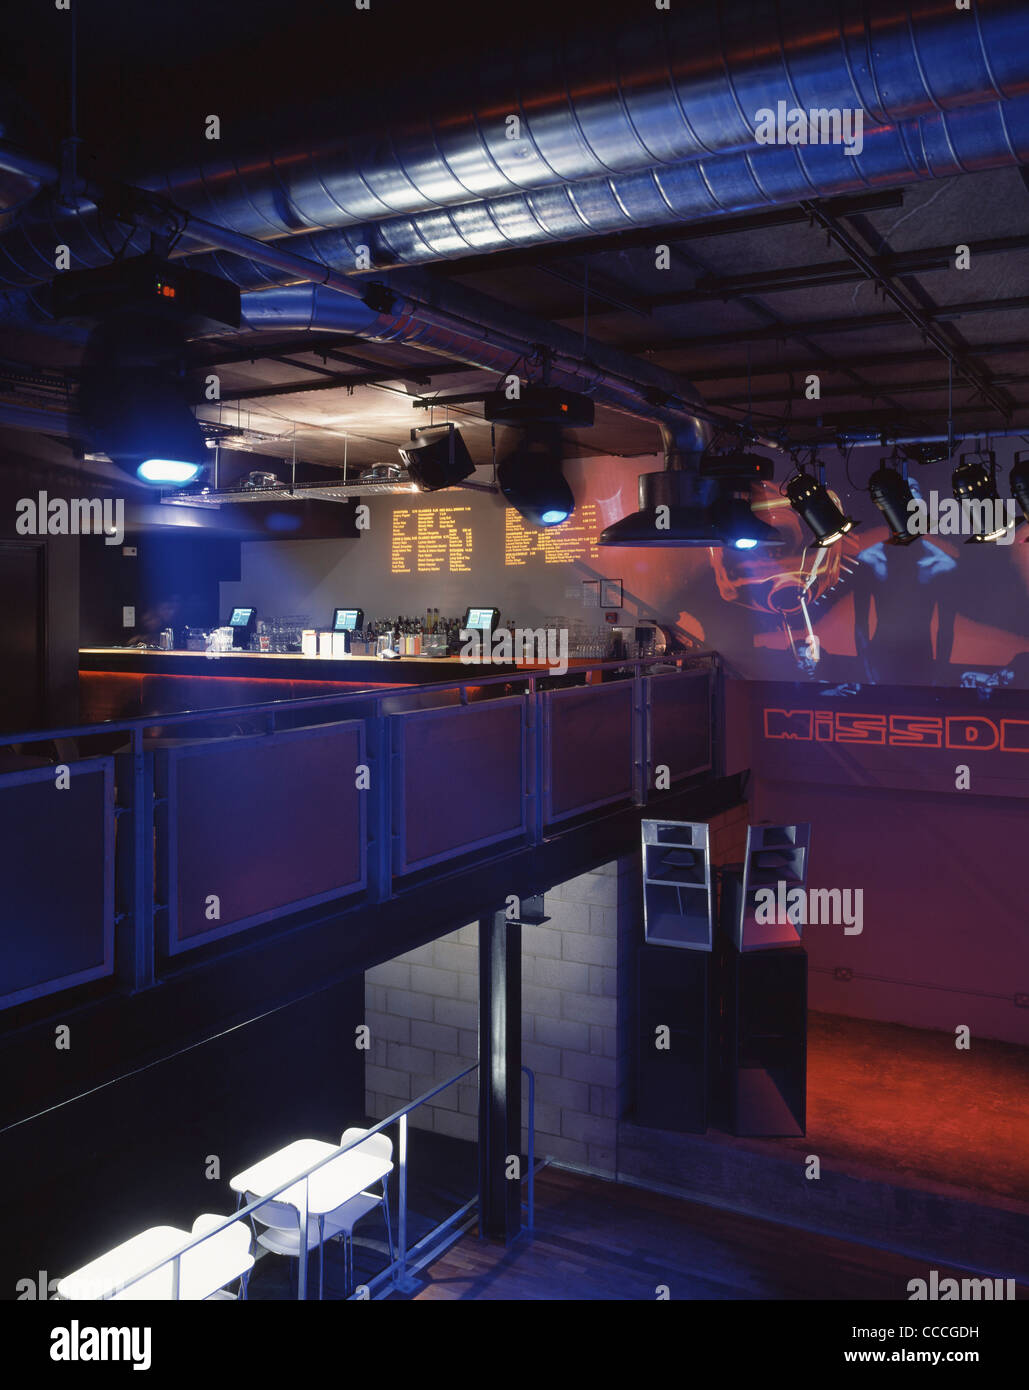 neighbourhood club mid level view showing mezzanine level bar and stage Stock Photo